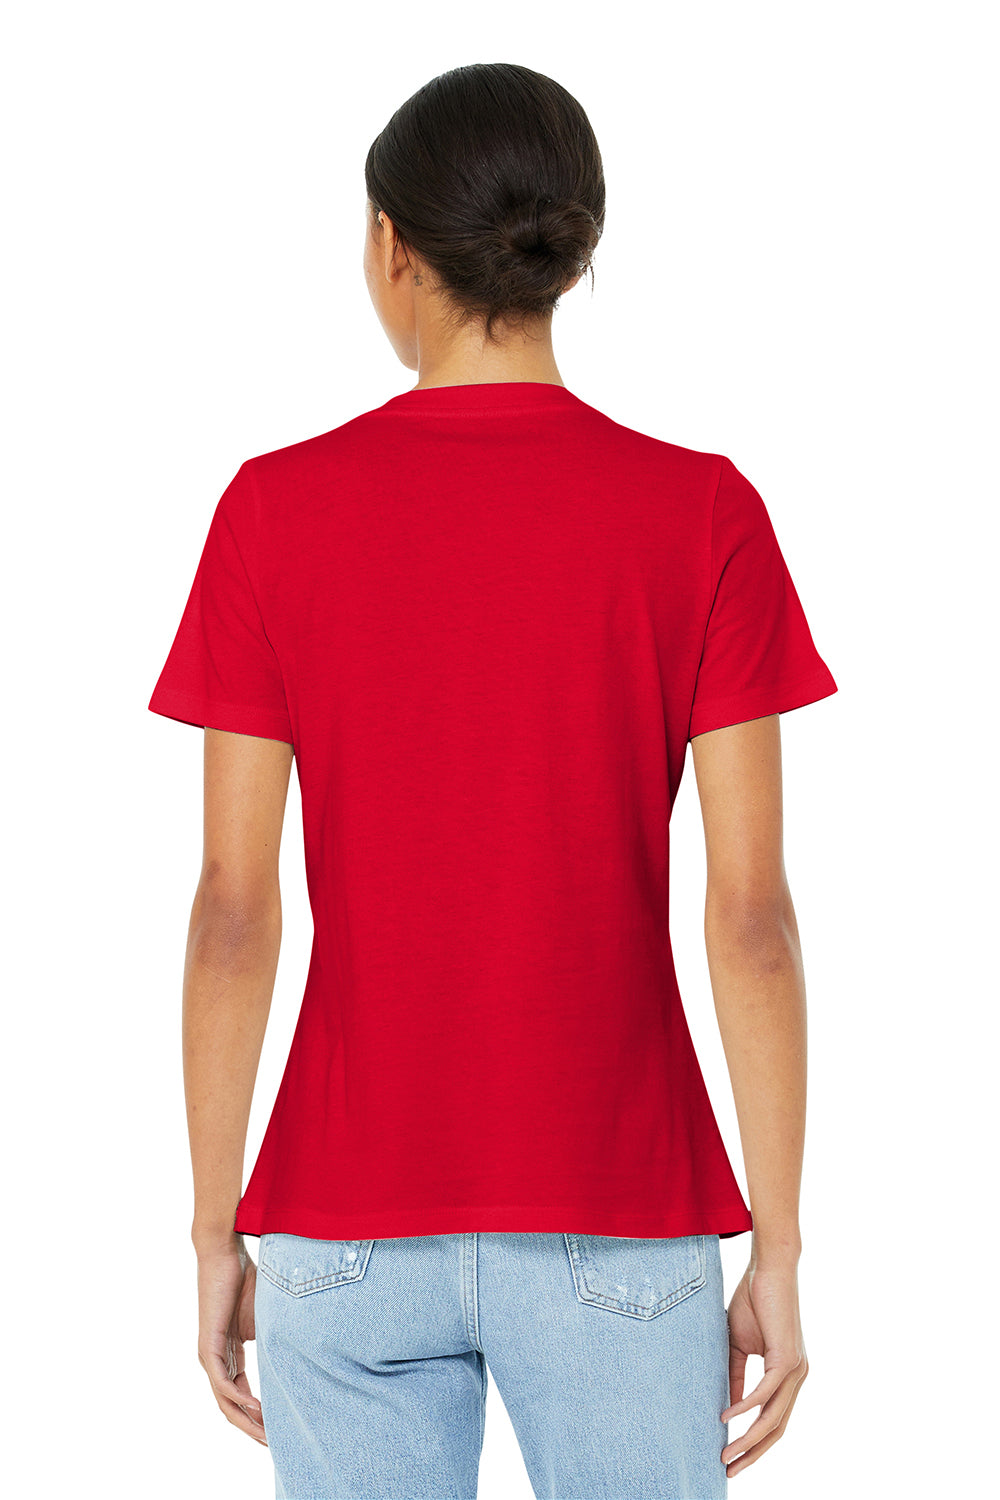 Bella + Canvas BC6405/6405 Womens Relaxed Jersey Short Sleeve V-Neck T-Shirt Red Model Back